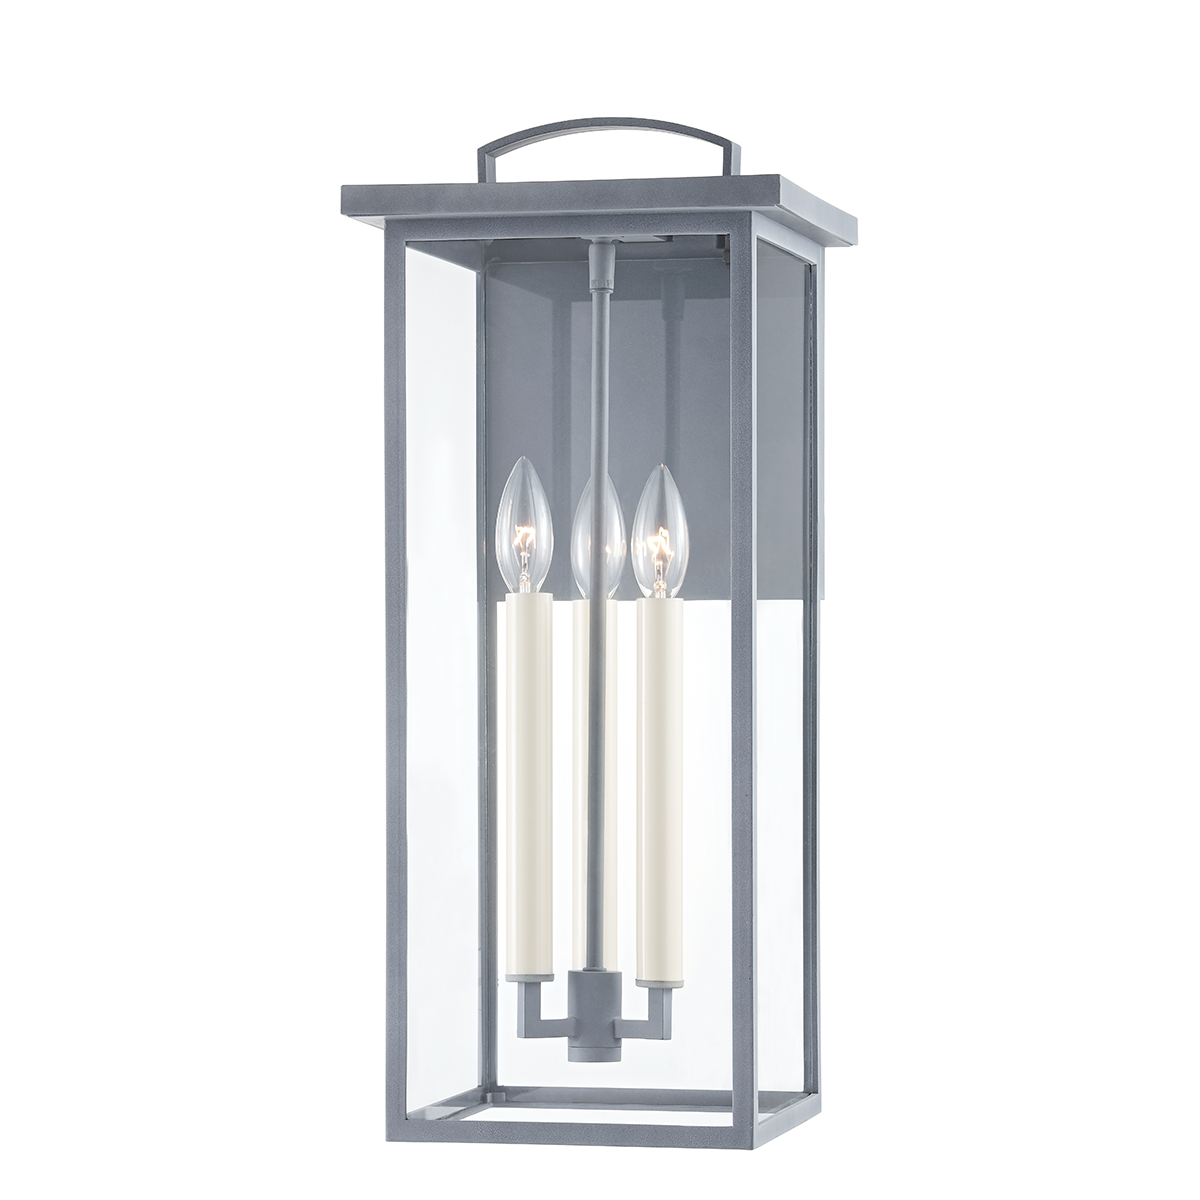 Troy EDEN 3 LIGHT LARGE EXTERIOR WALL SCONCE B7523 Outdoor l Wall Troy Lighting WEATHERED ZINC  